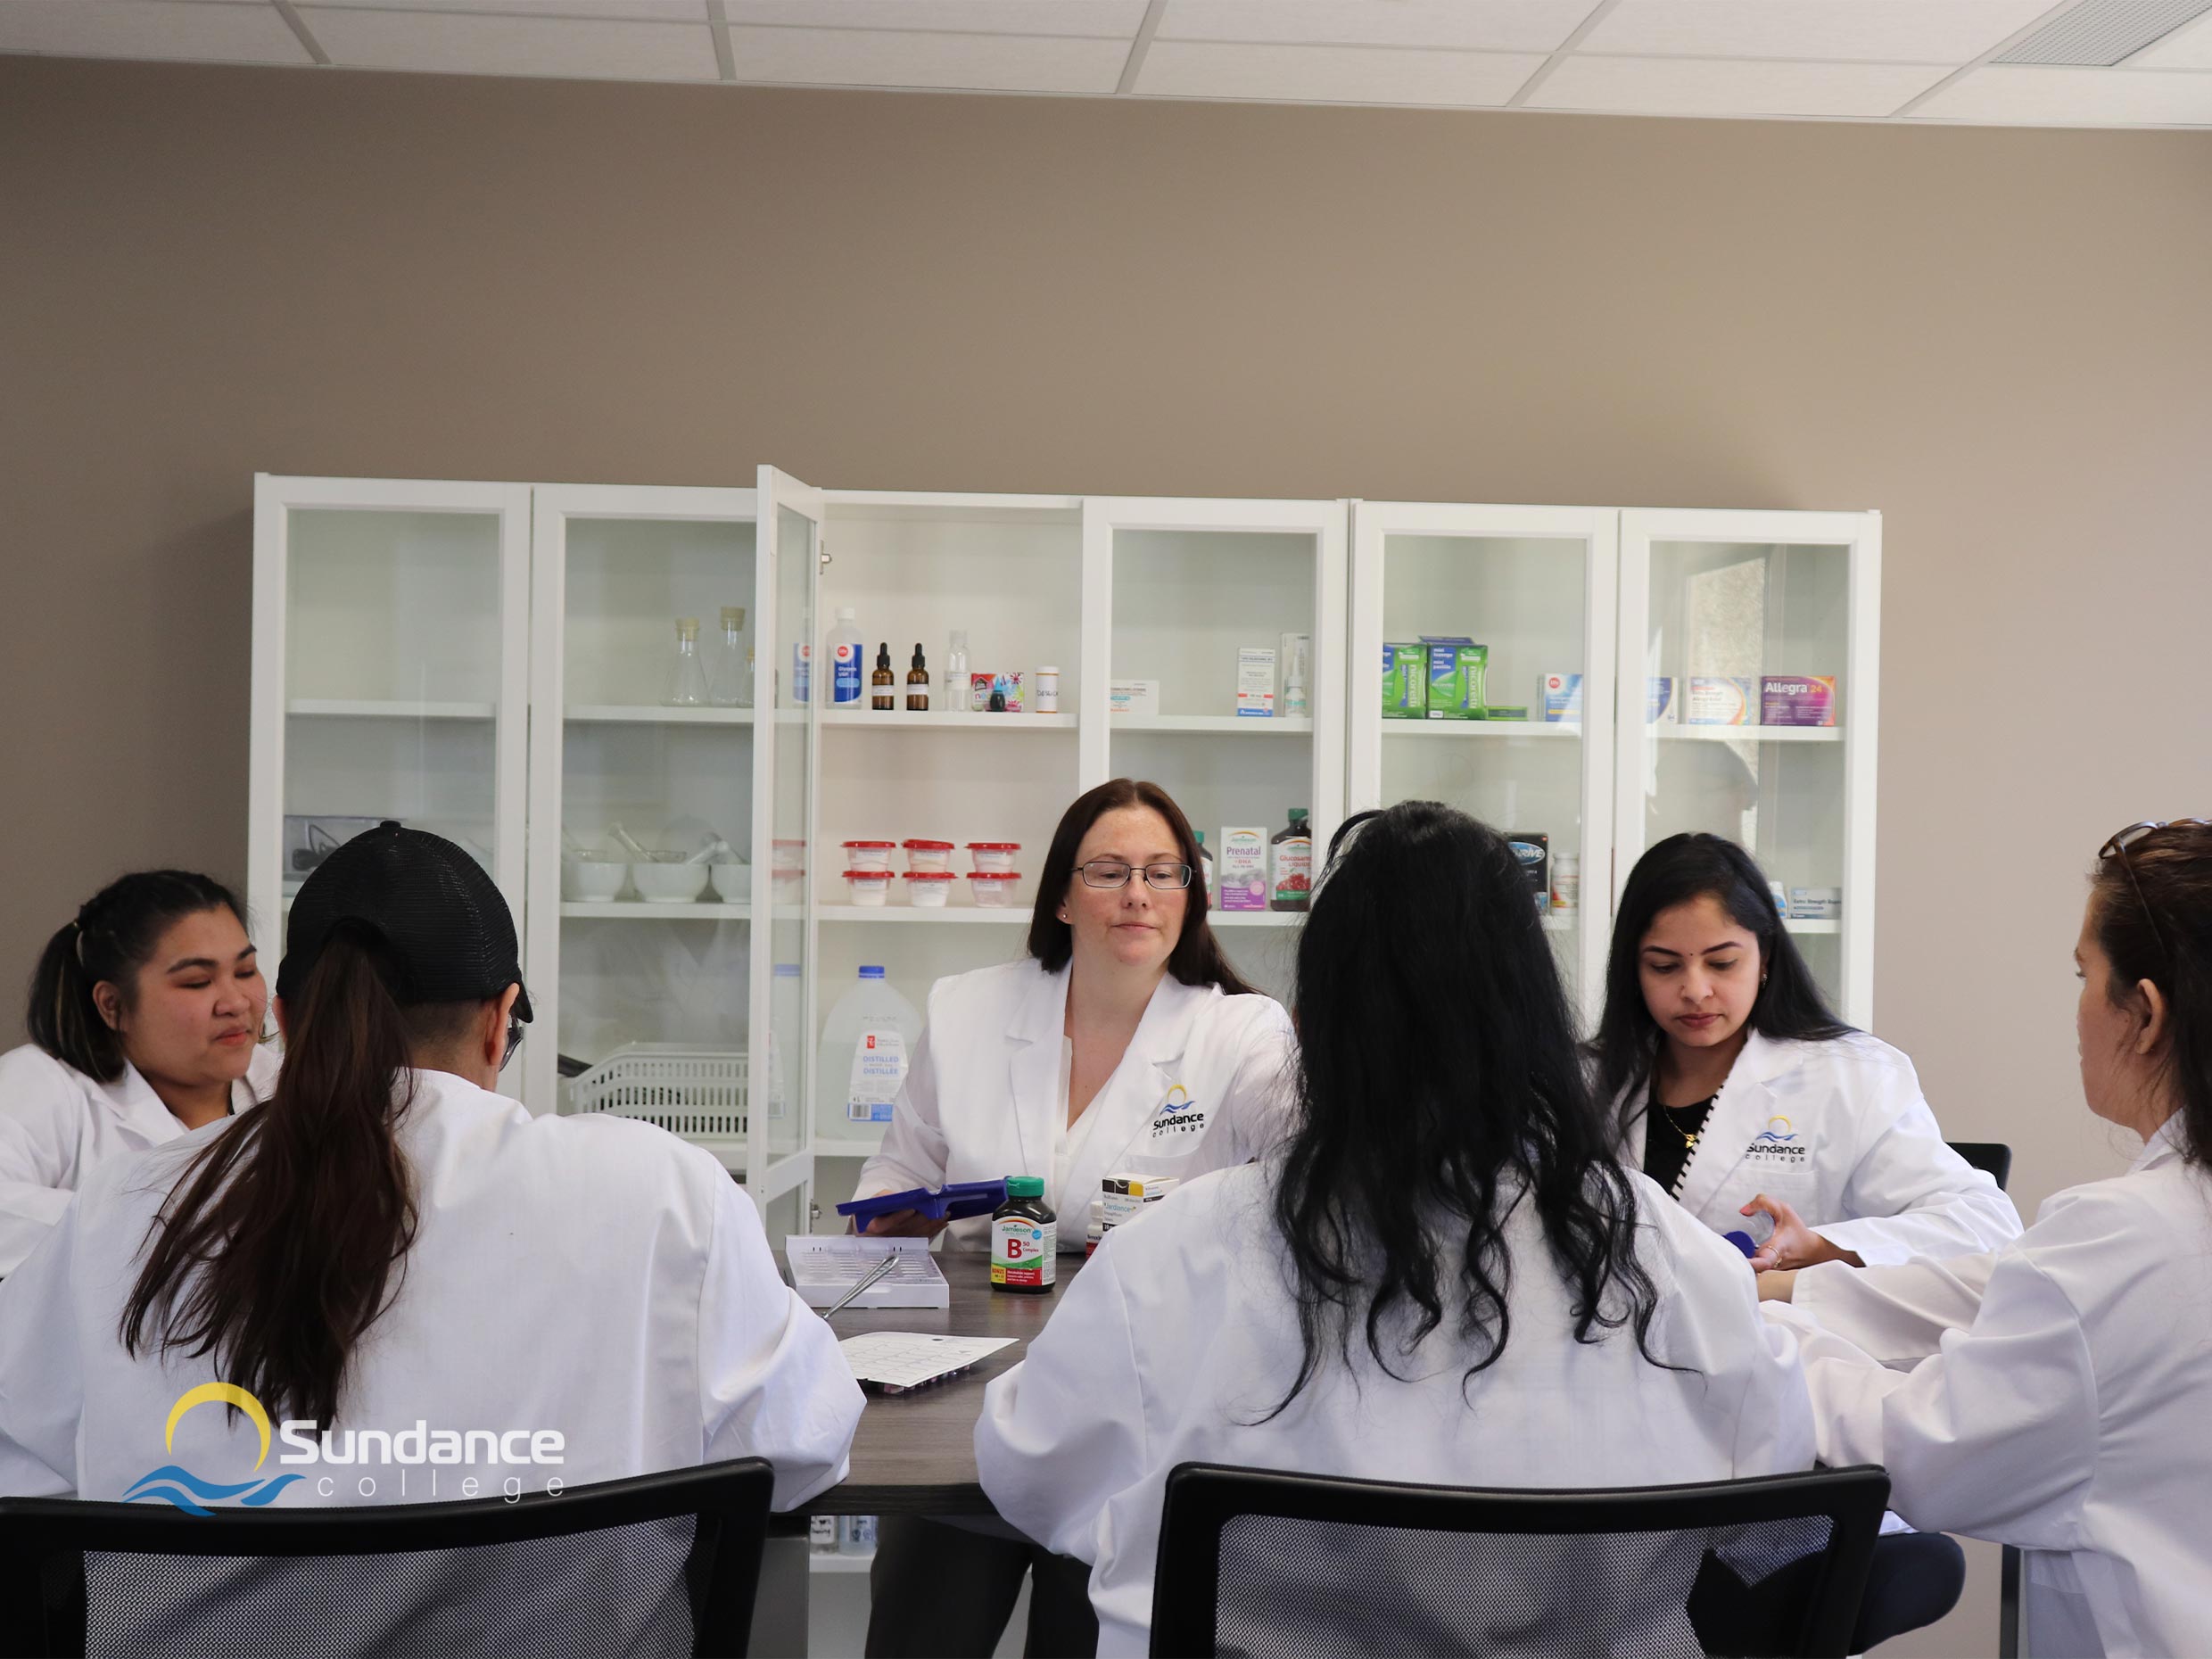 The hands-on training for Pharmacy Assistant students in one of the Sundance College campus-based pharmacy labs.